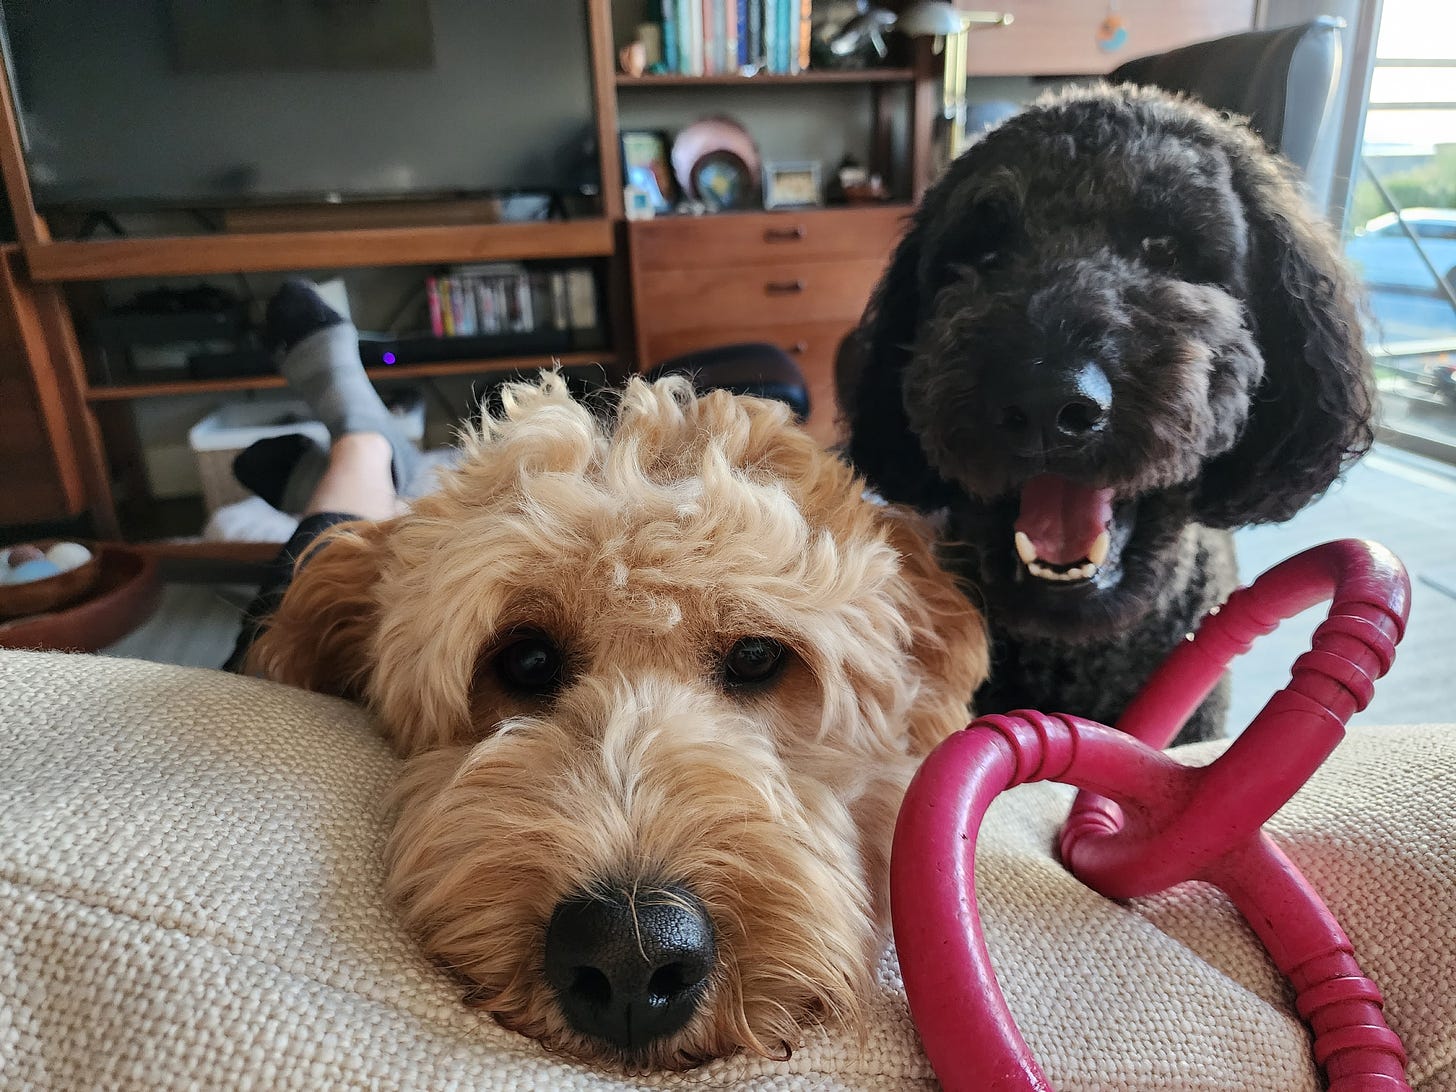 Our two goldendooles, rescued through International Doodle Owners Group, have high expectations for entertainment.